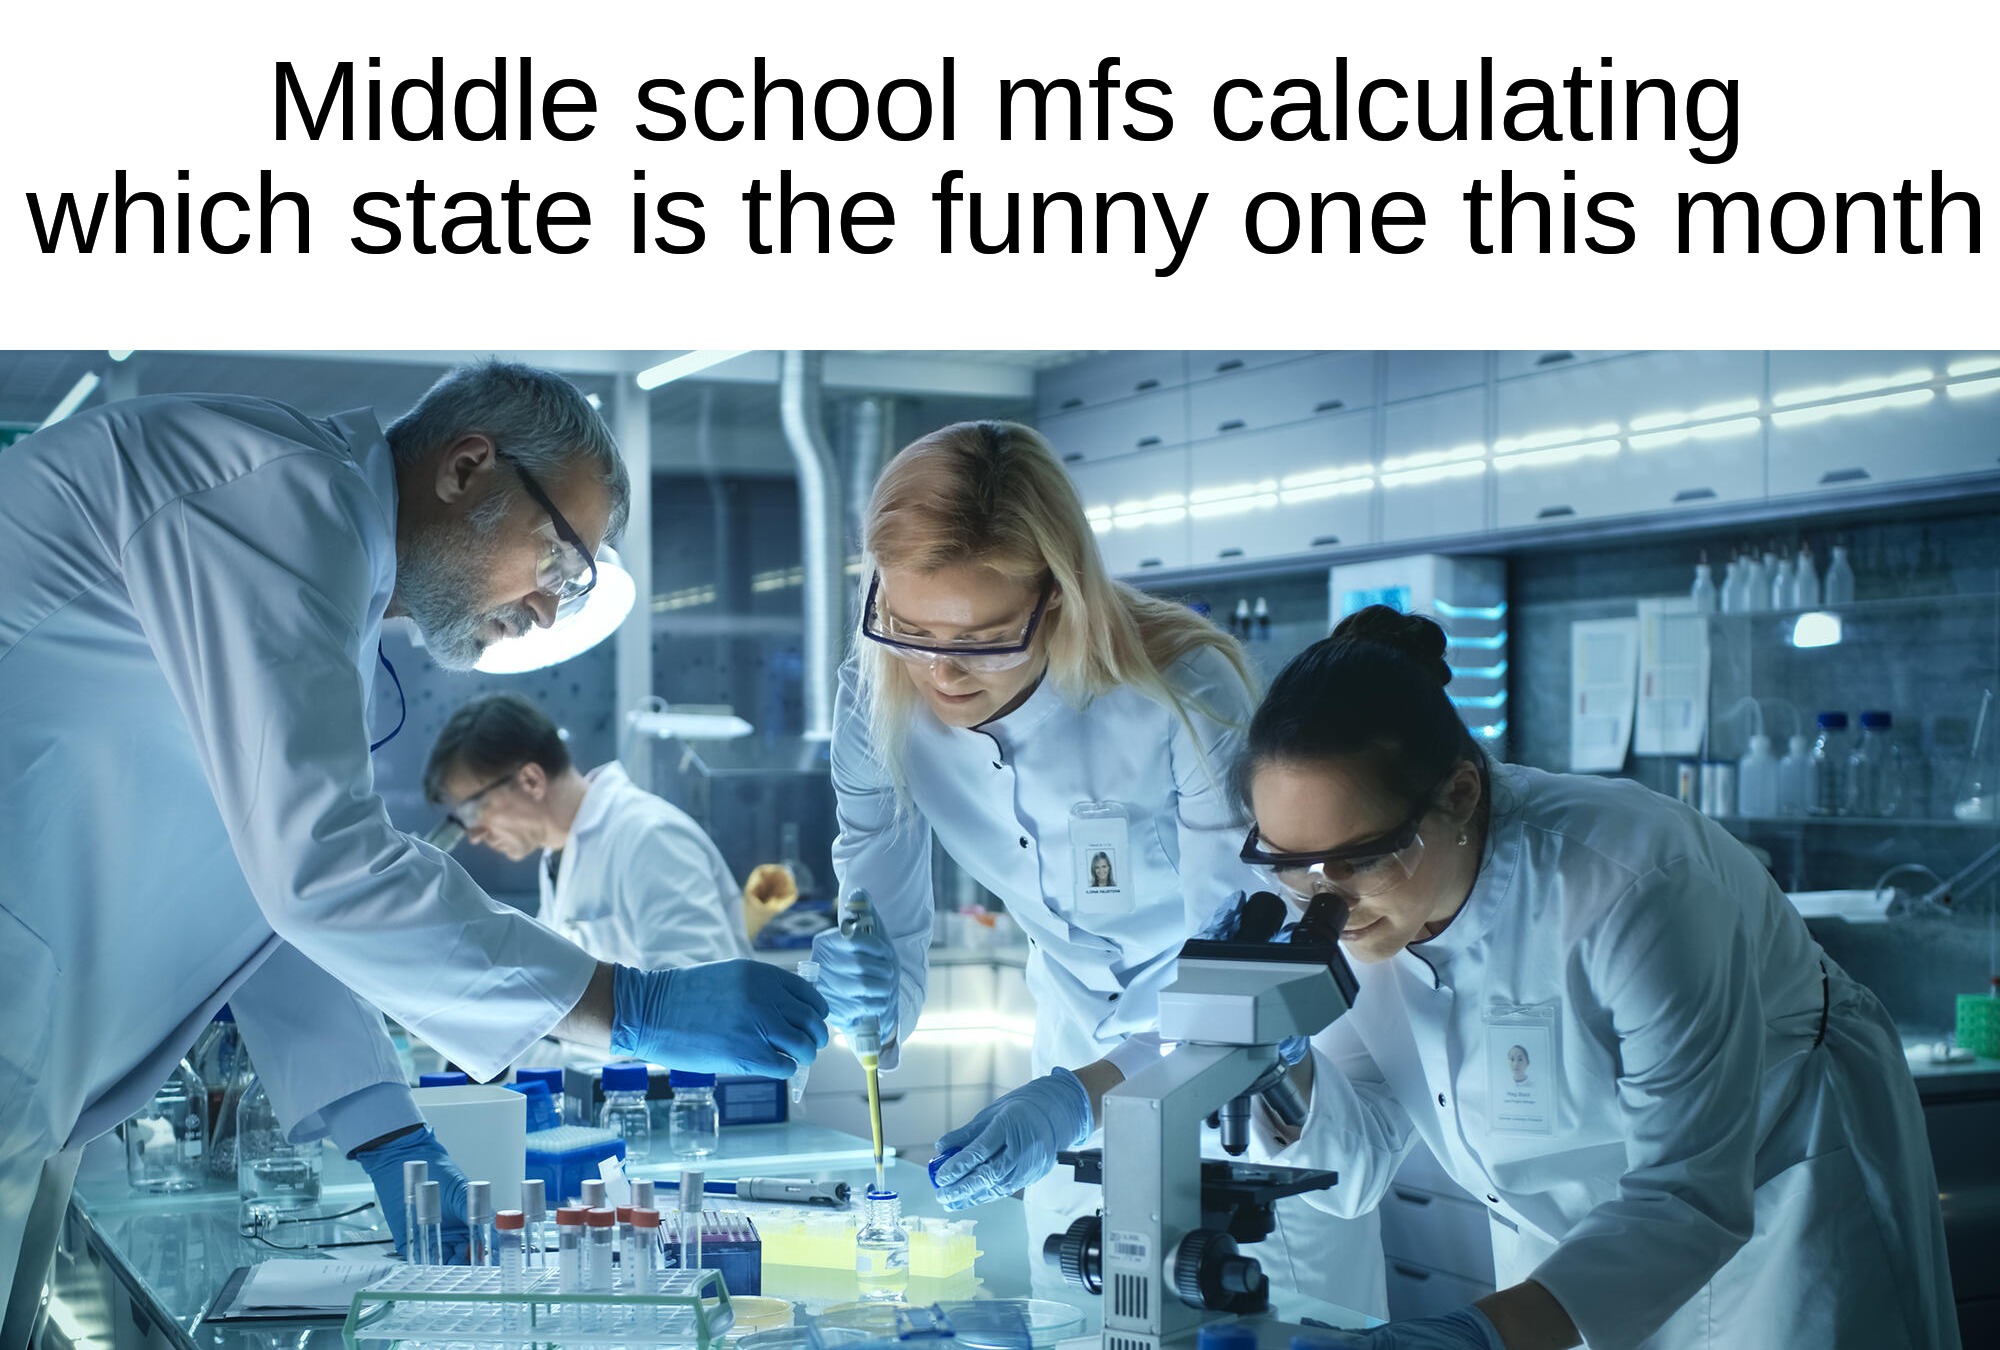 Ohio all over again | Middle school mfs calculating which state is the funny one this month | image tagged in laboratory scientists,memes,funny,true story,relatable memes,school | made w/ Imgflip meme maker